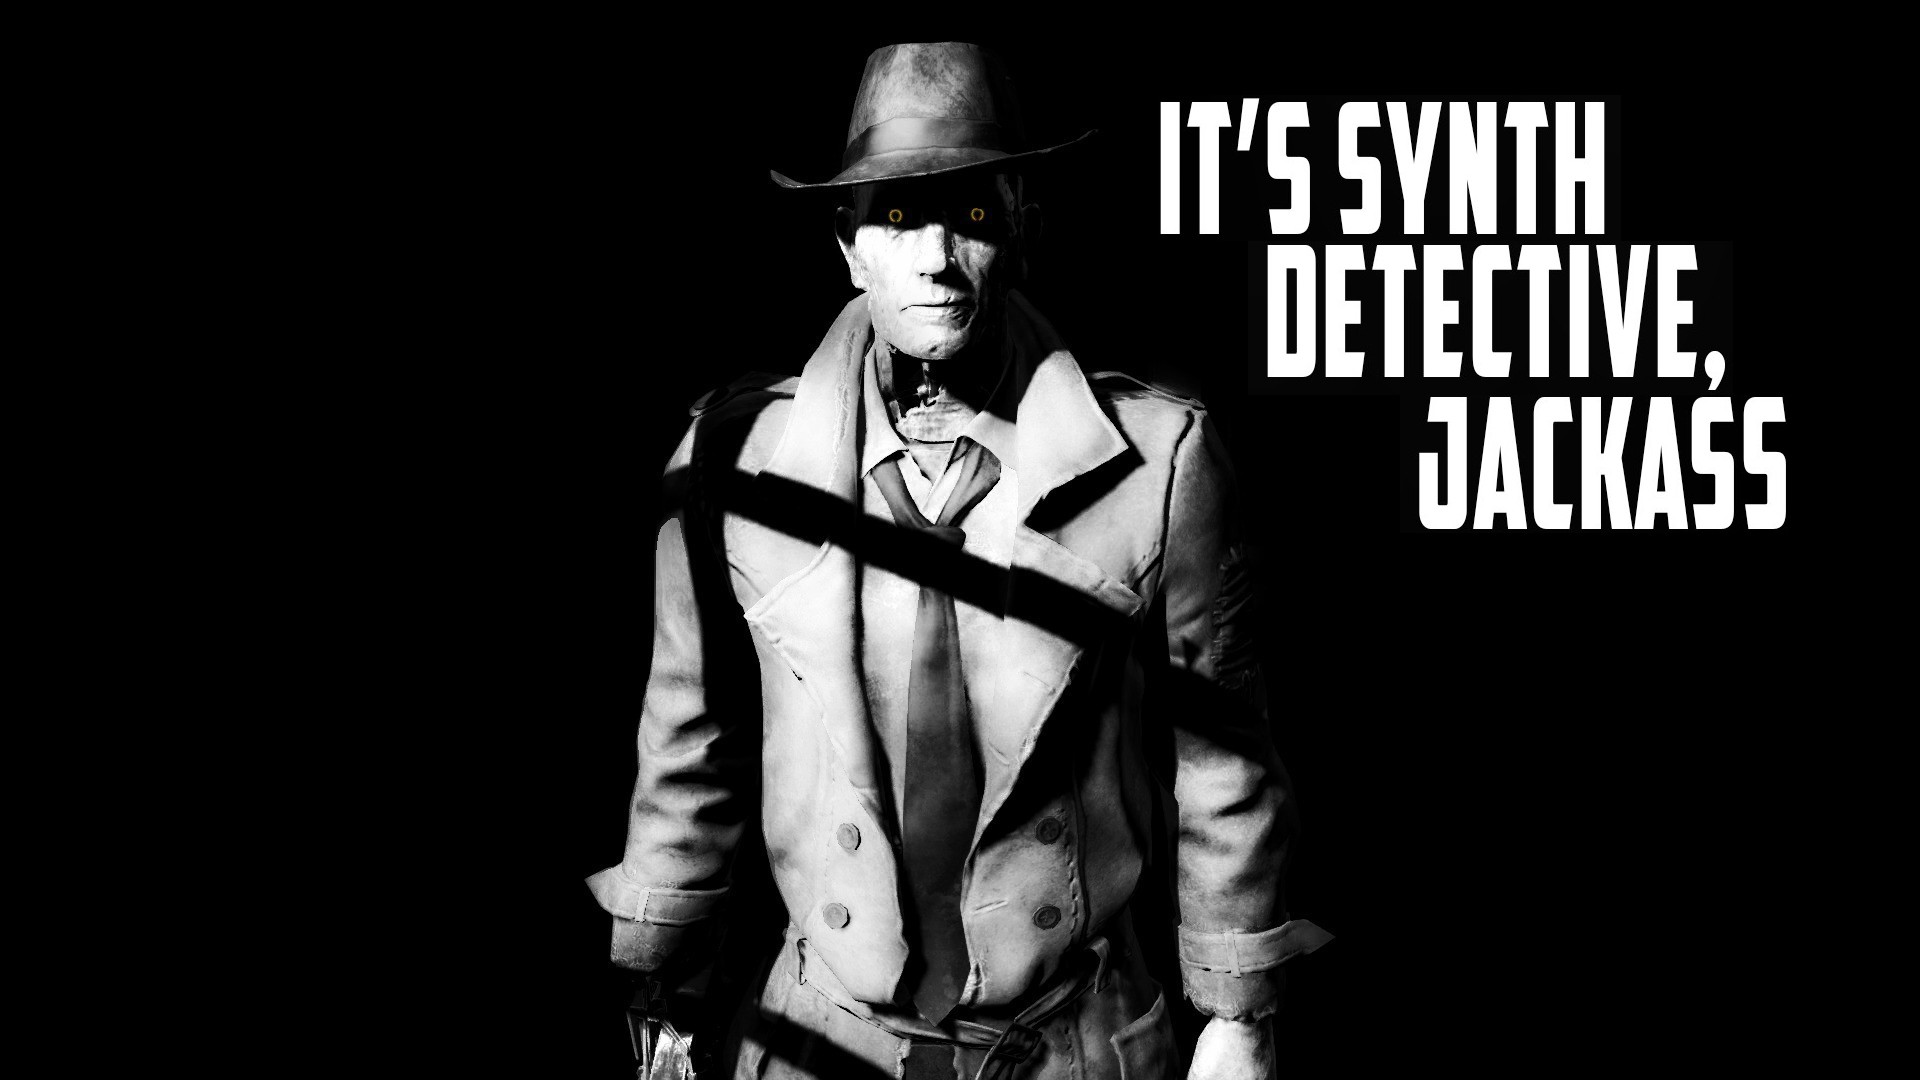 General 1920x1080 Fallout 4 Nick Valentine quote monochrome Fallout Synth Bethesda Softworks video games machine robot PC gaming black background simple background